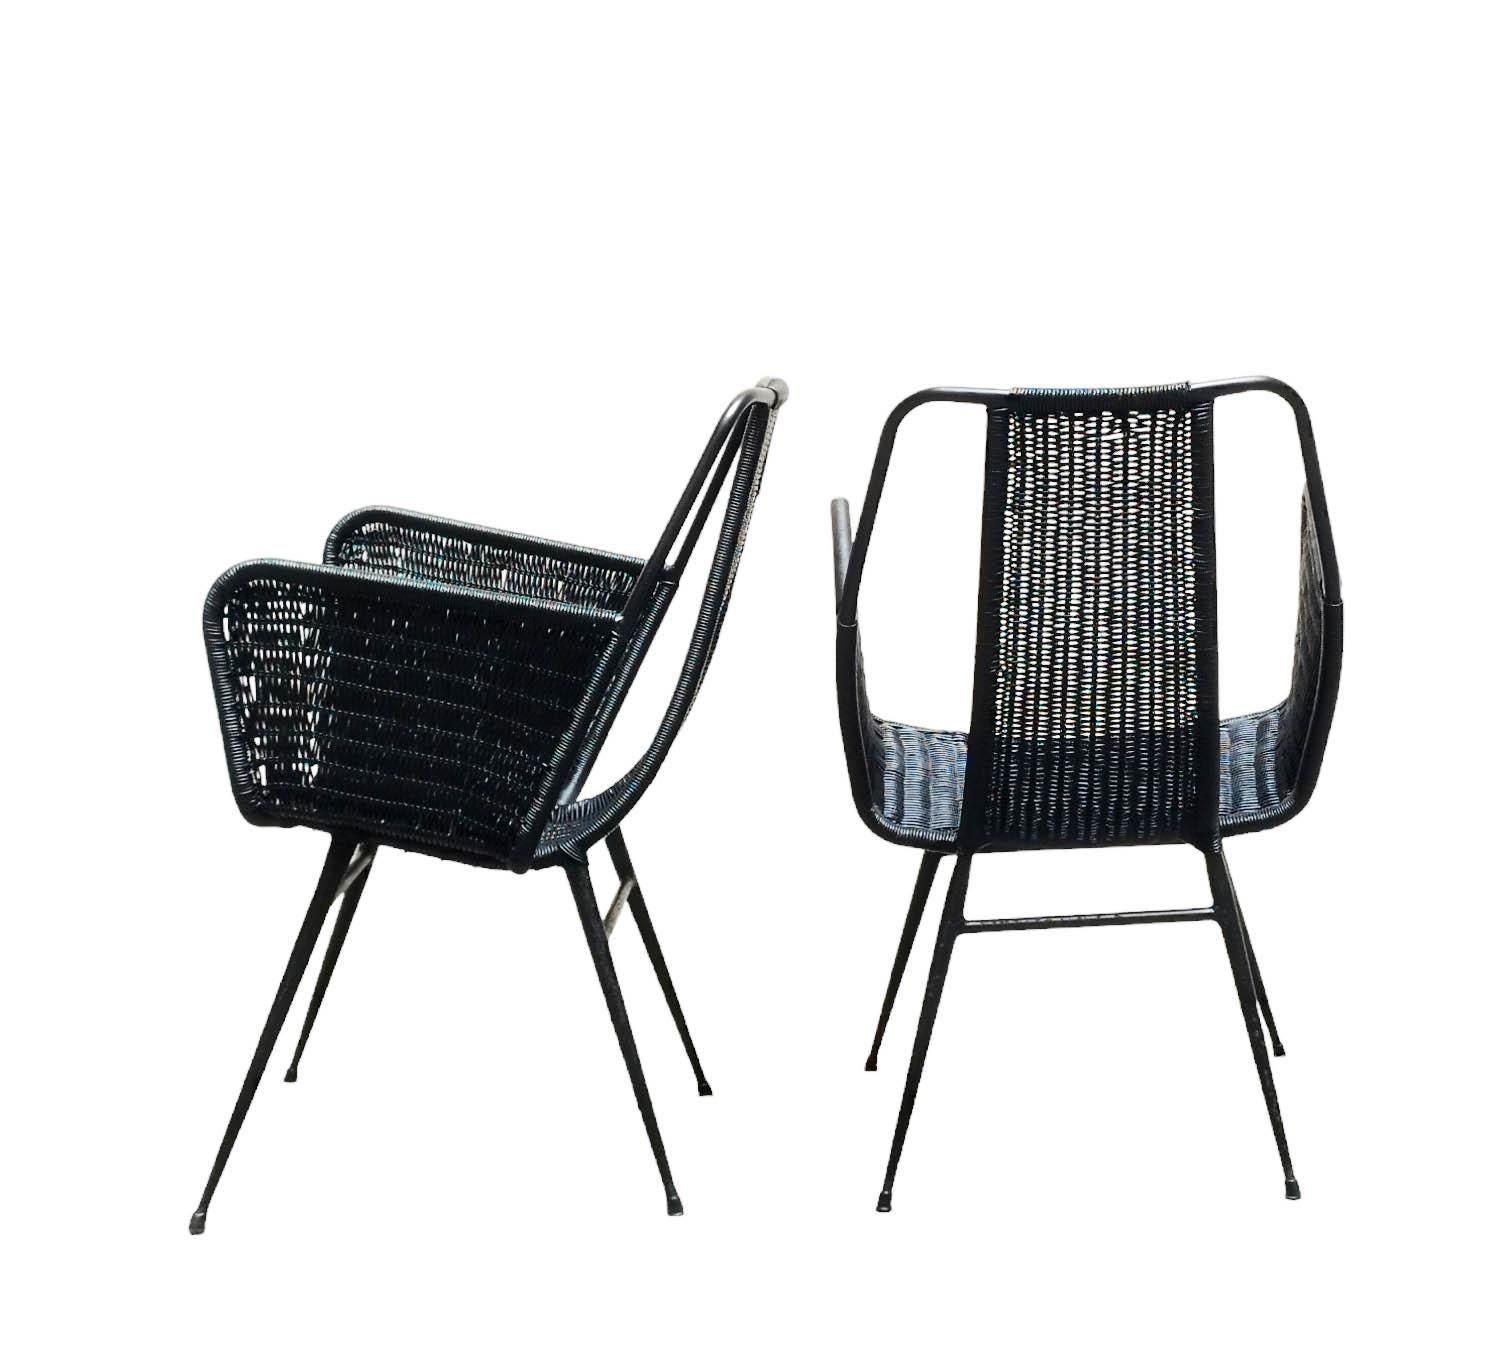 Italian Gastone Rinaldi, Pair of Outdoor Armchairs in Woven Plastic, Italy 1960s/70s For Sale